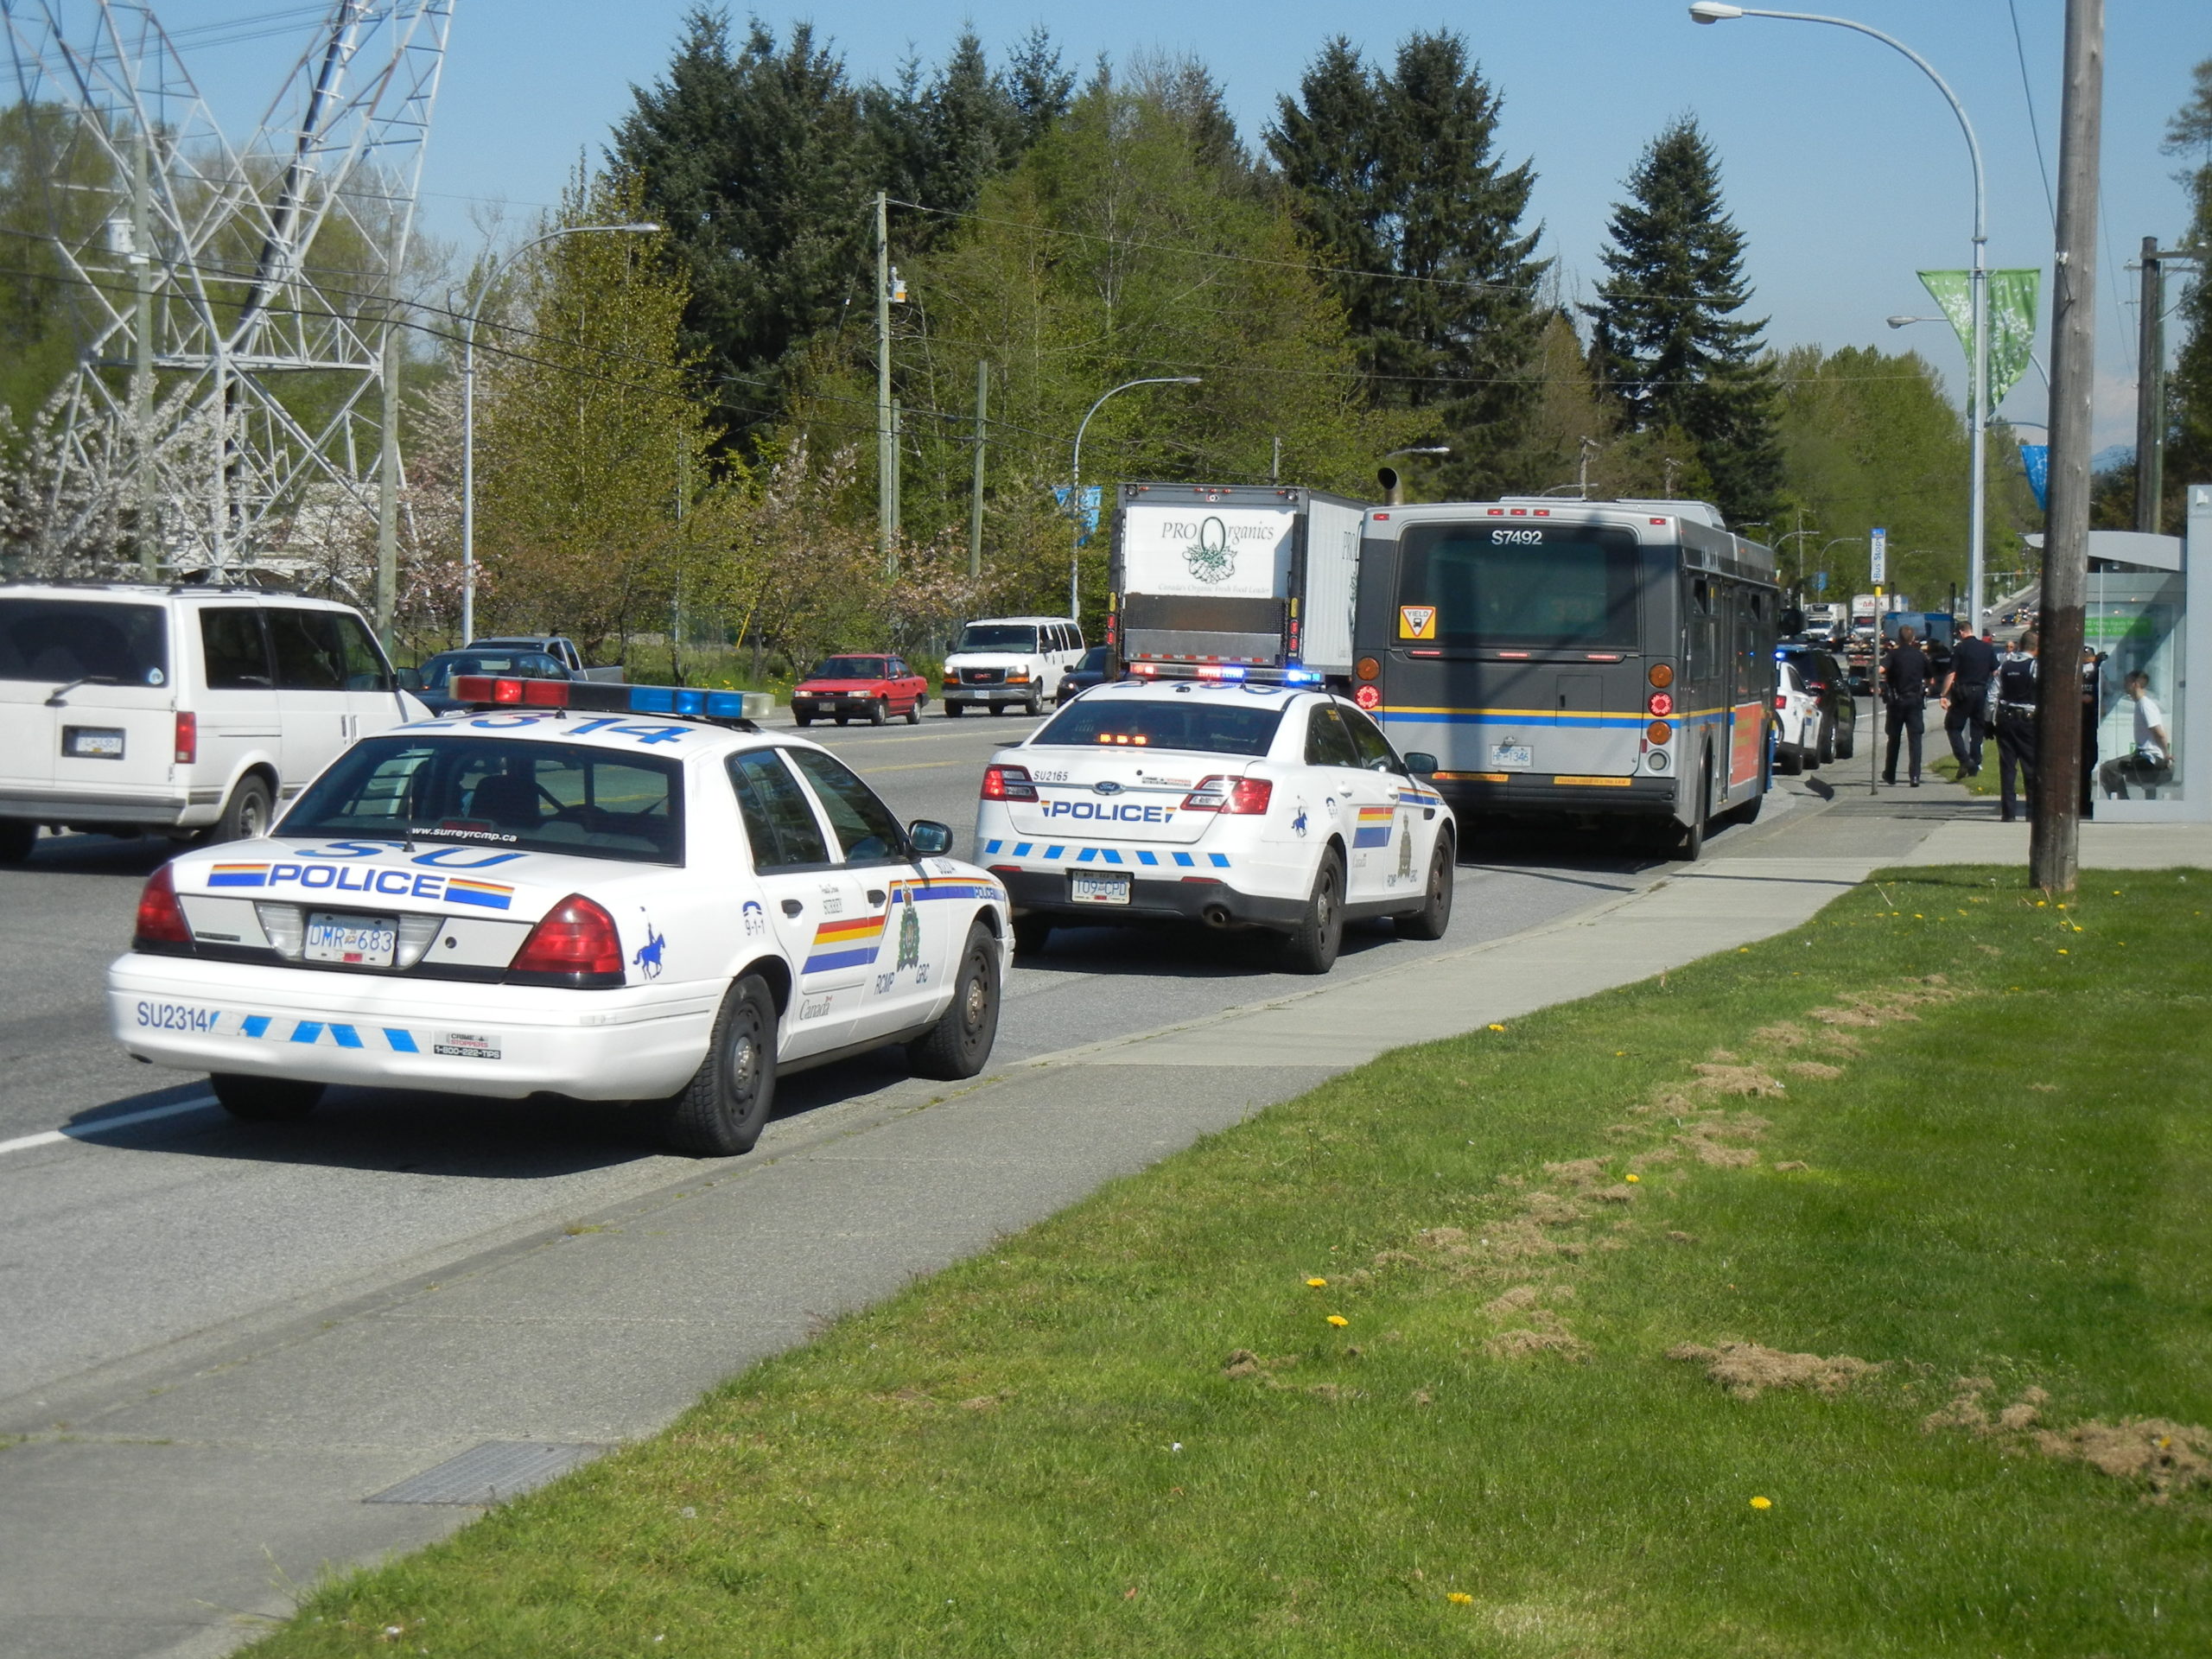 Another gang related shooting in Surrey, one man in hospital